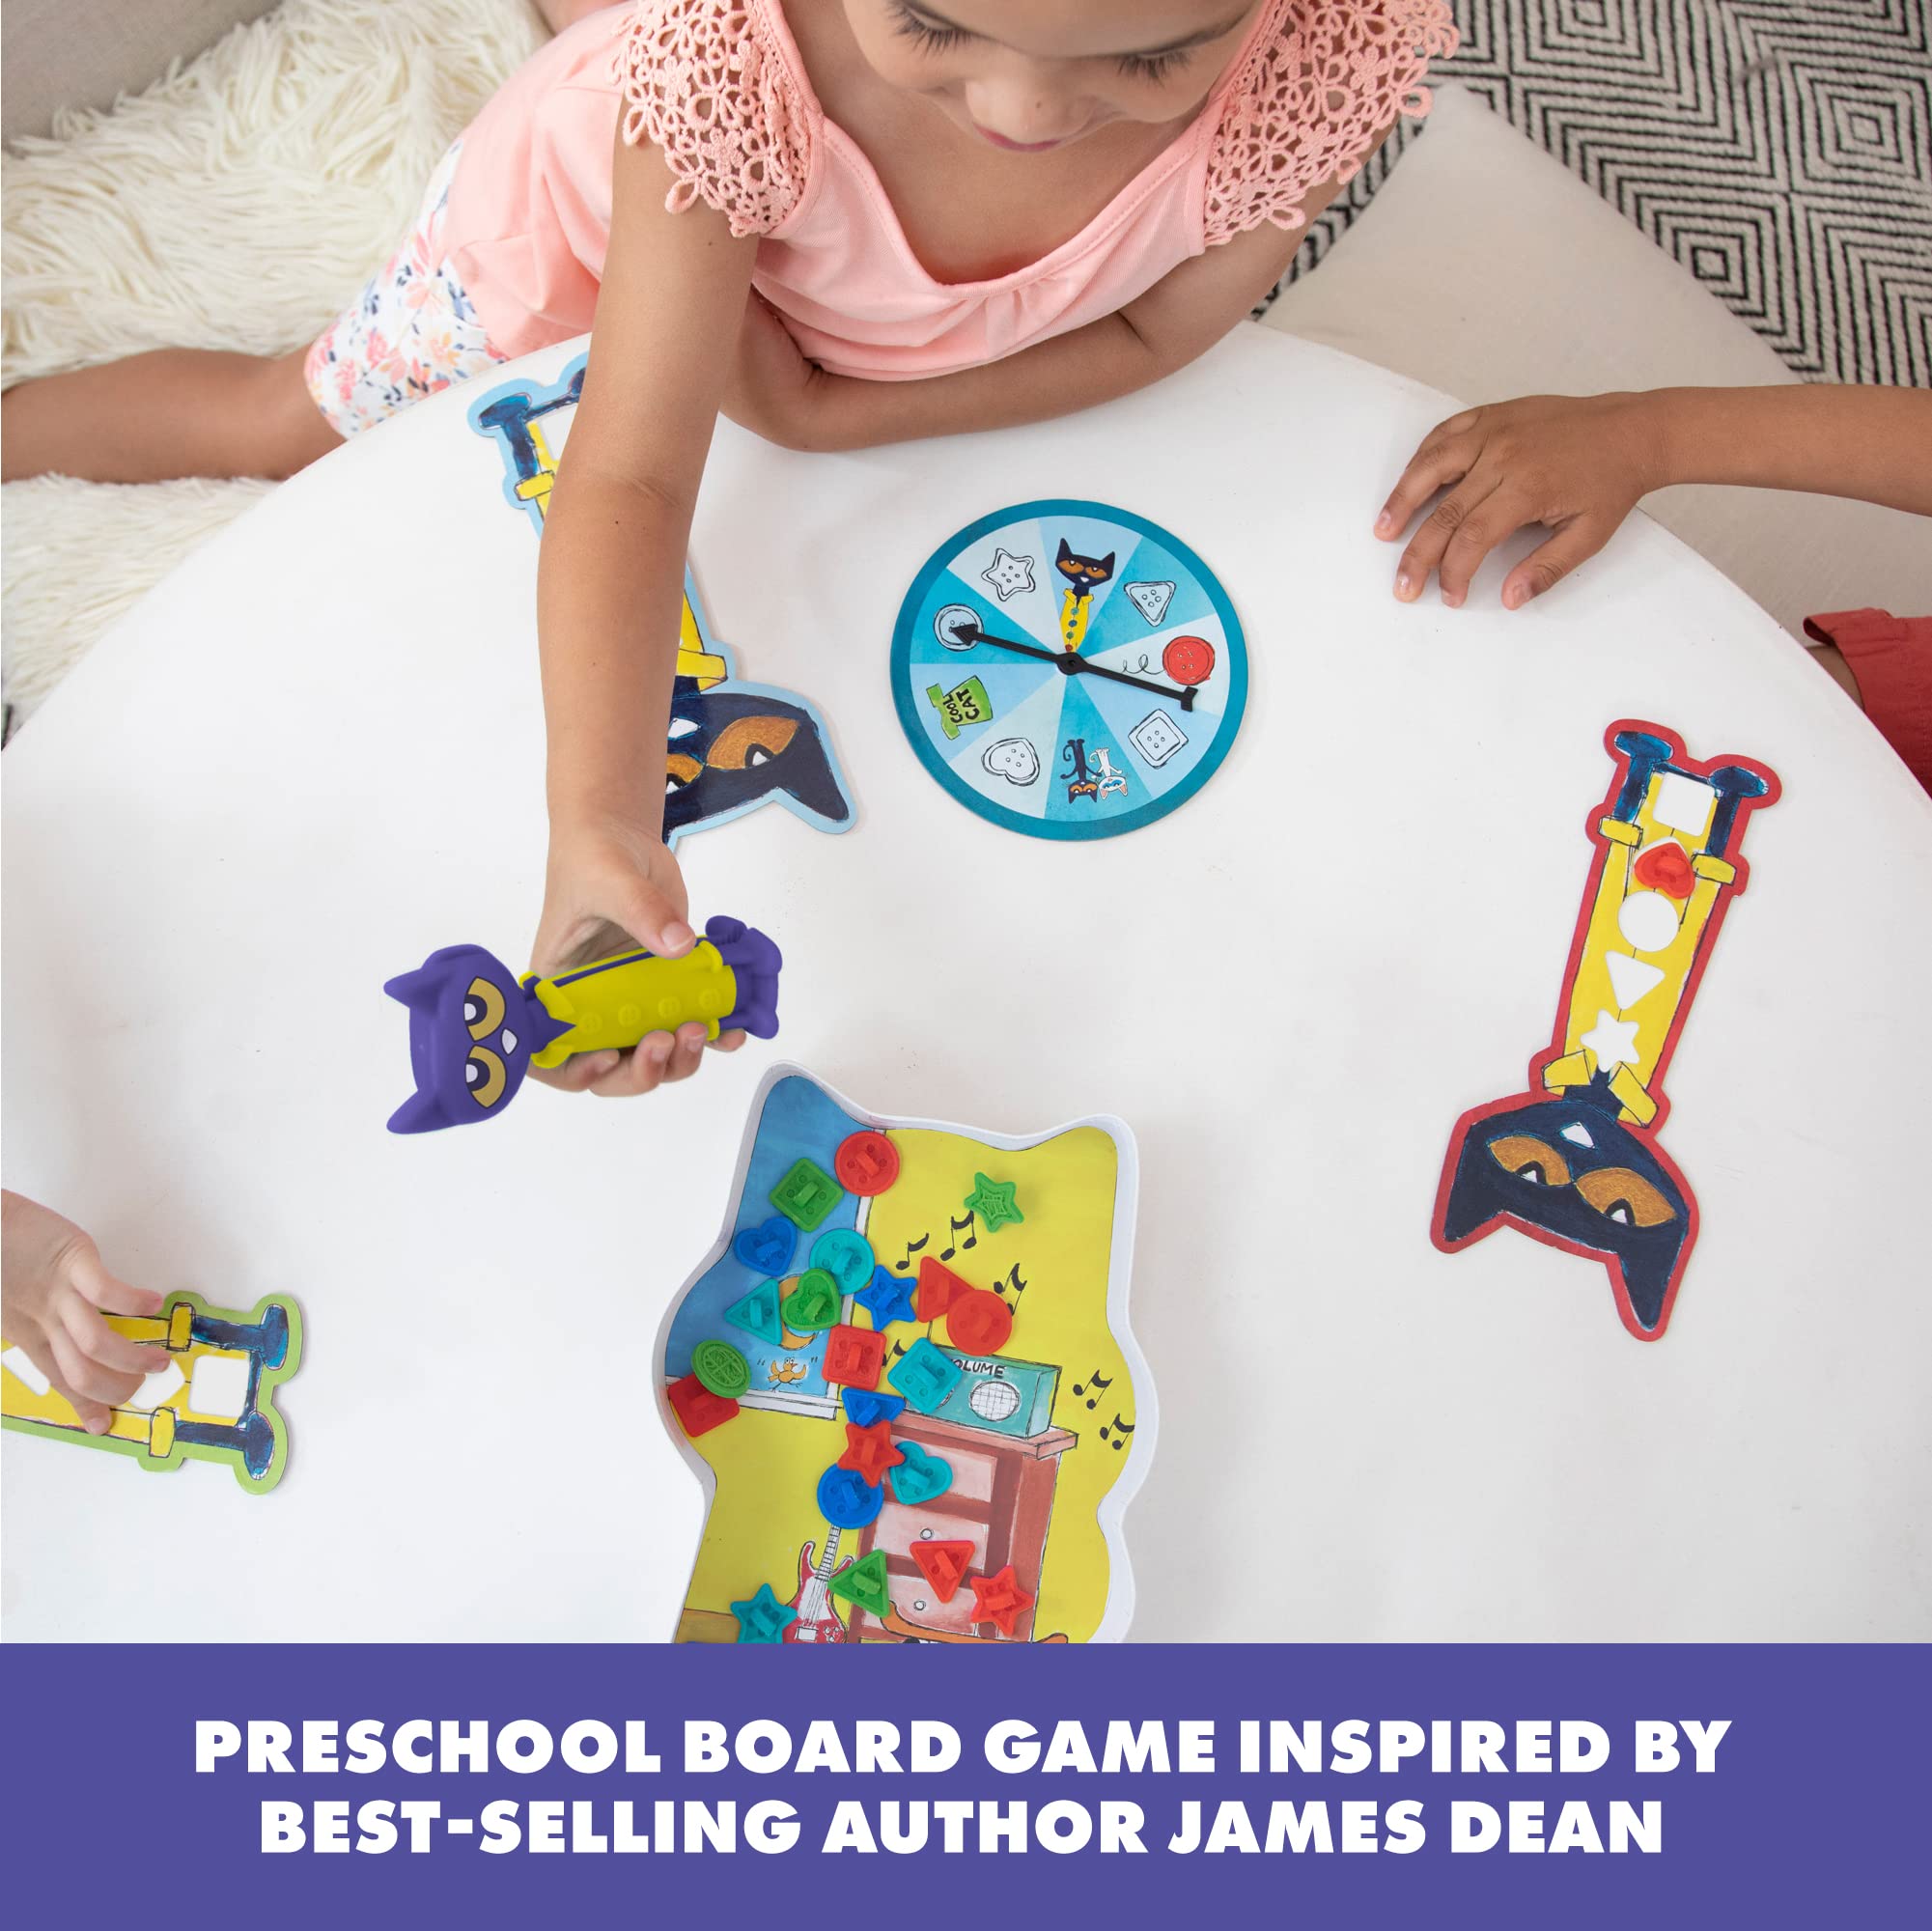 Educational Insights Pete The Cat I Love My Buttons Board Game For Toddlers & Preschoolers, For 2-4 Players, Gift For Boys & Girls, Fun Family Game For Kids Ages 3+